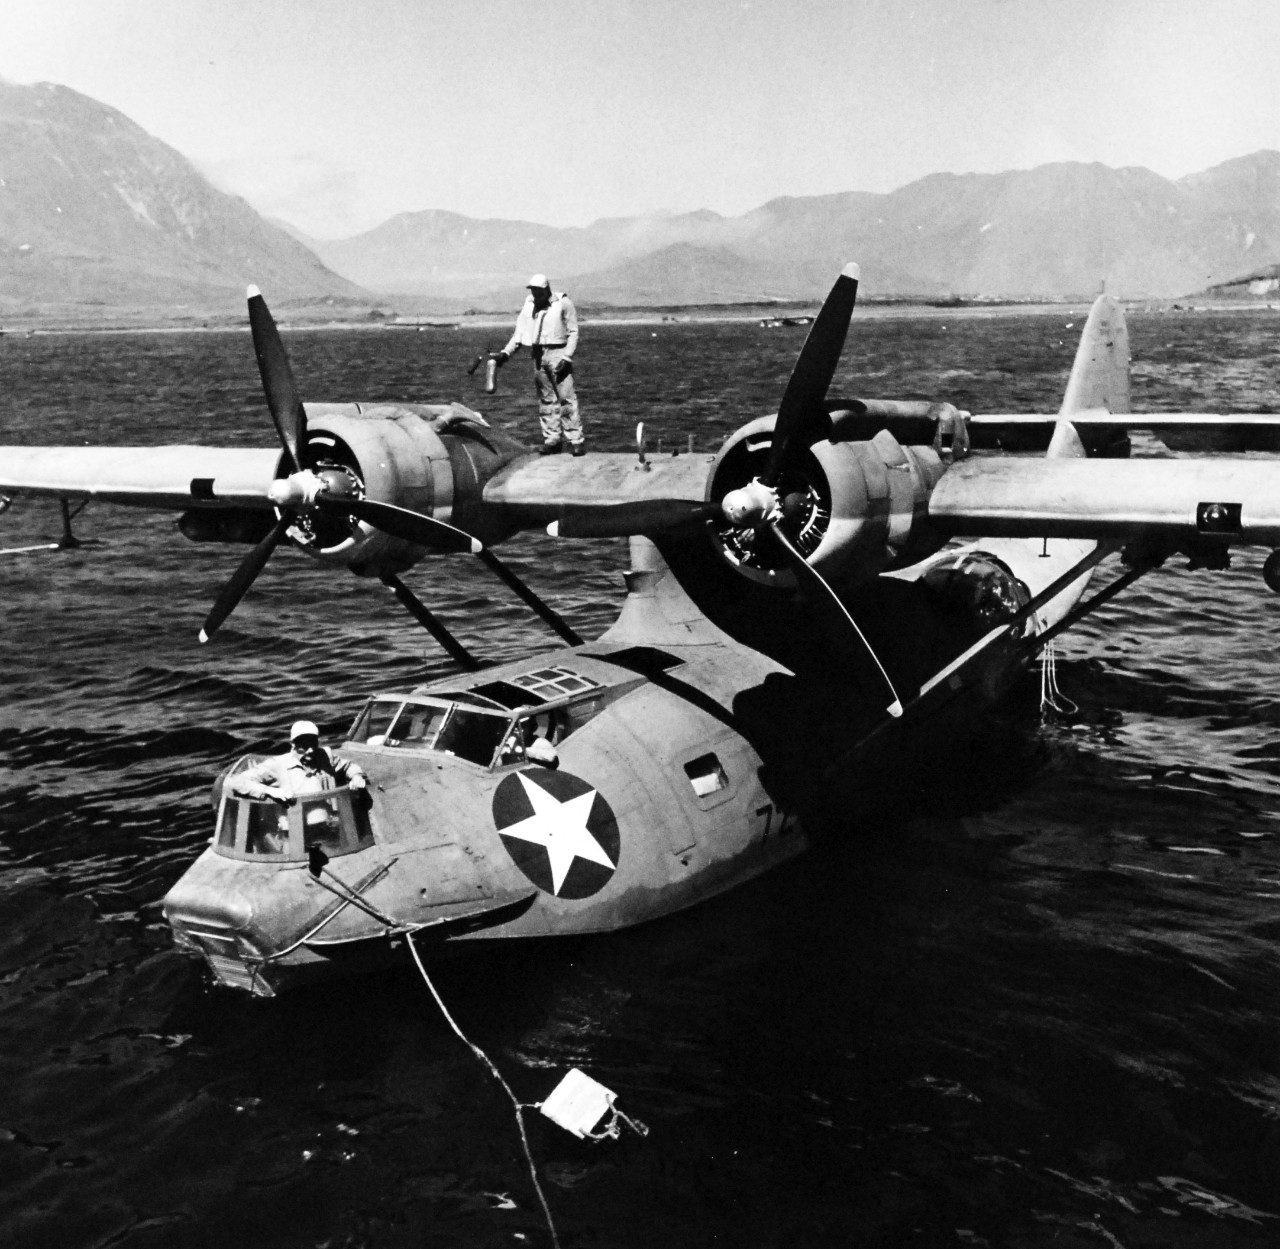 80-G-475771:   PBY-5 “Catalina” patrol bomber, July 1943.   PBY-5 crew member stands by with extinguisher while motors are started on a Consolidated PBY “Catalina” aircraft near USS Casco (AVP 12) at Attu, Aleutian Islands.   Photographed by Lieutenant Horace Bristol, July 1943.   TR-5374.   U.S. Navy photograph, now in the collections of the National Archives.  (2015/11/17).